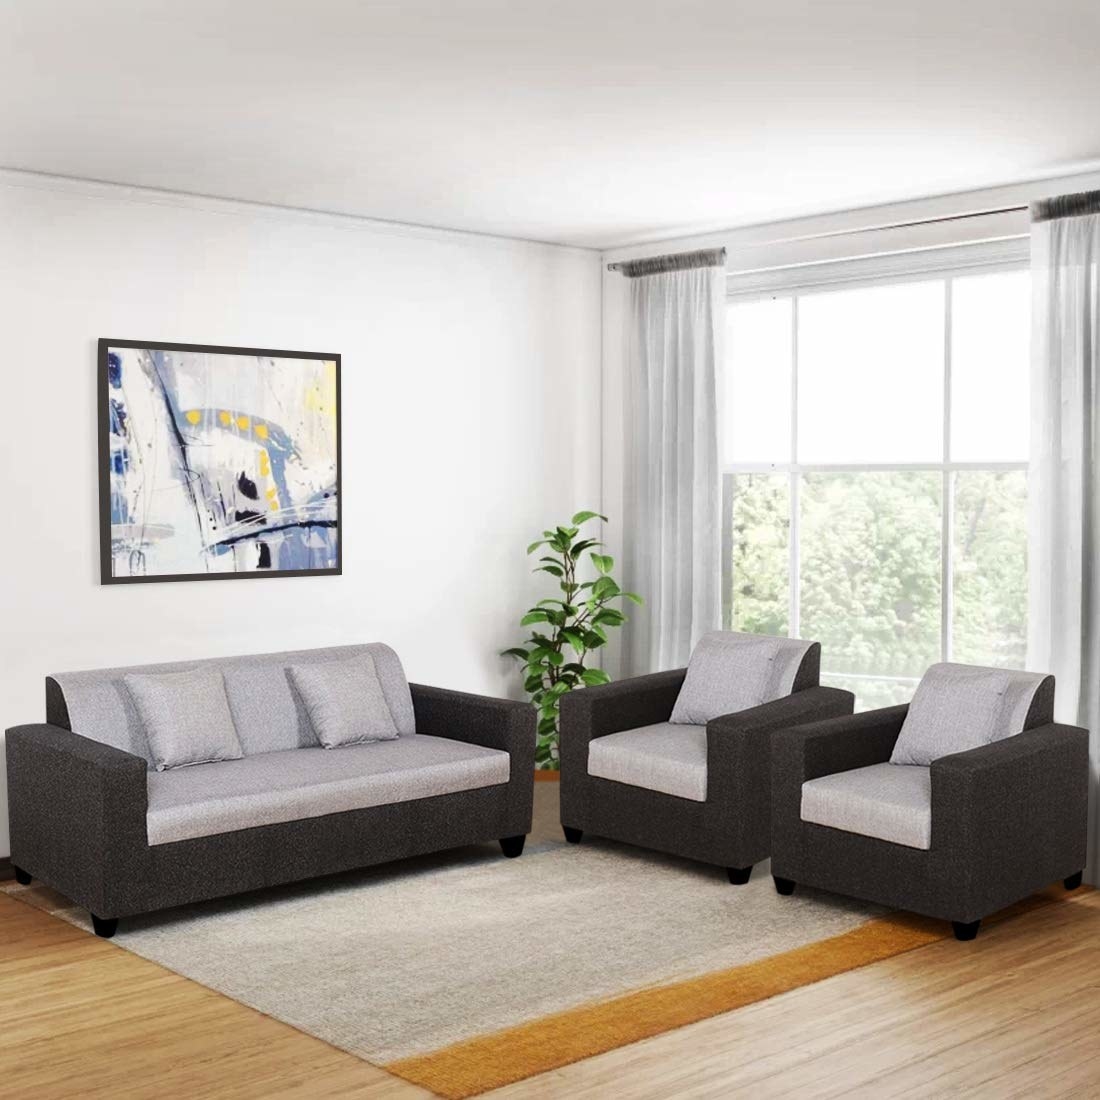 A two-seater sofa next to two sofa chairs